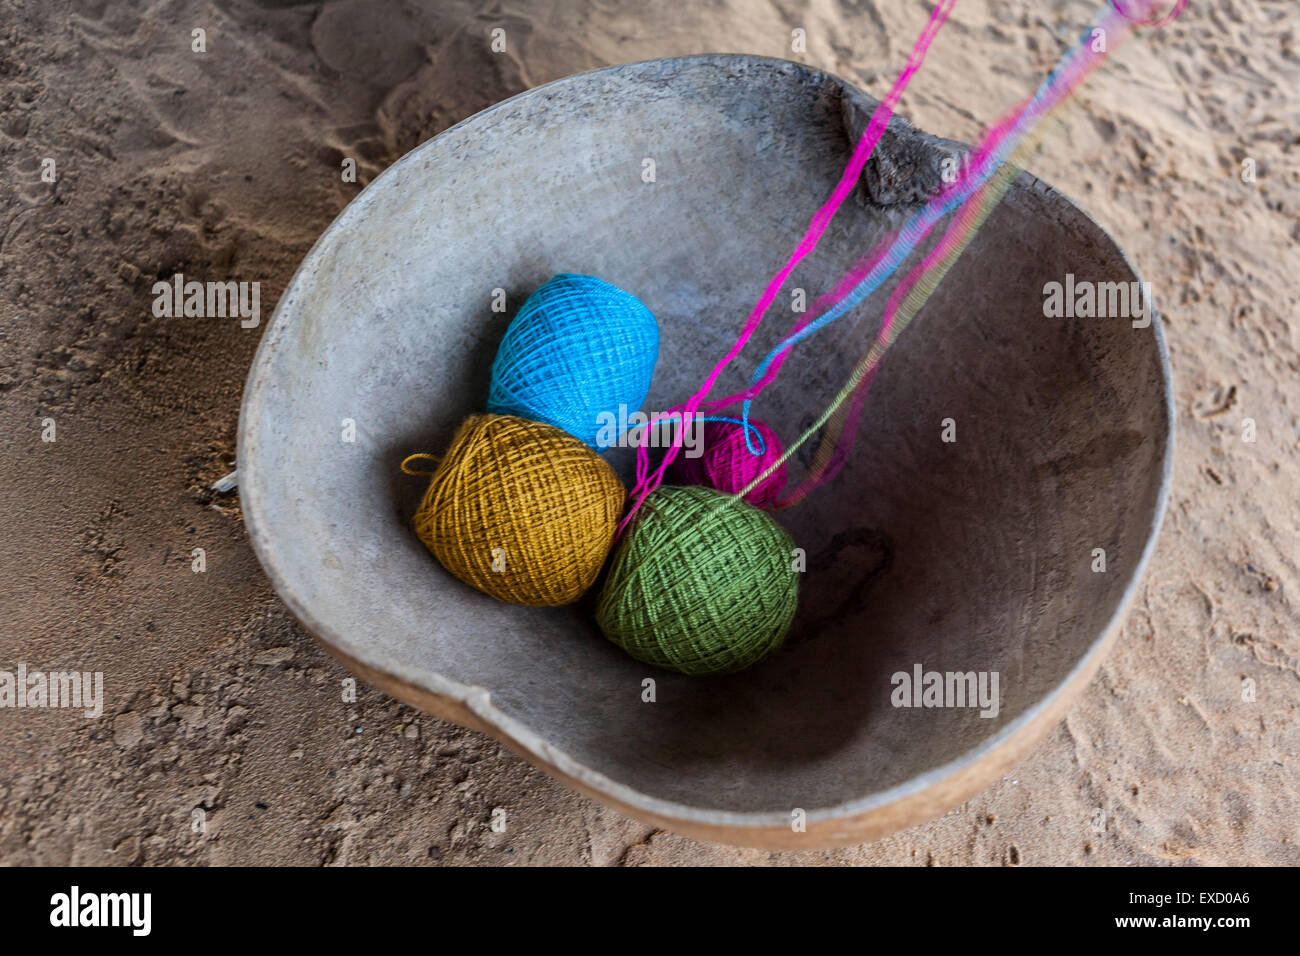 Knitting thread in a large calabash bowl in a Wayuu rancheria or rural settlement.  Knitting, crocheting and weaving are fundame Stock Photo